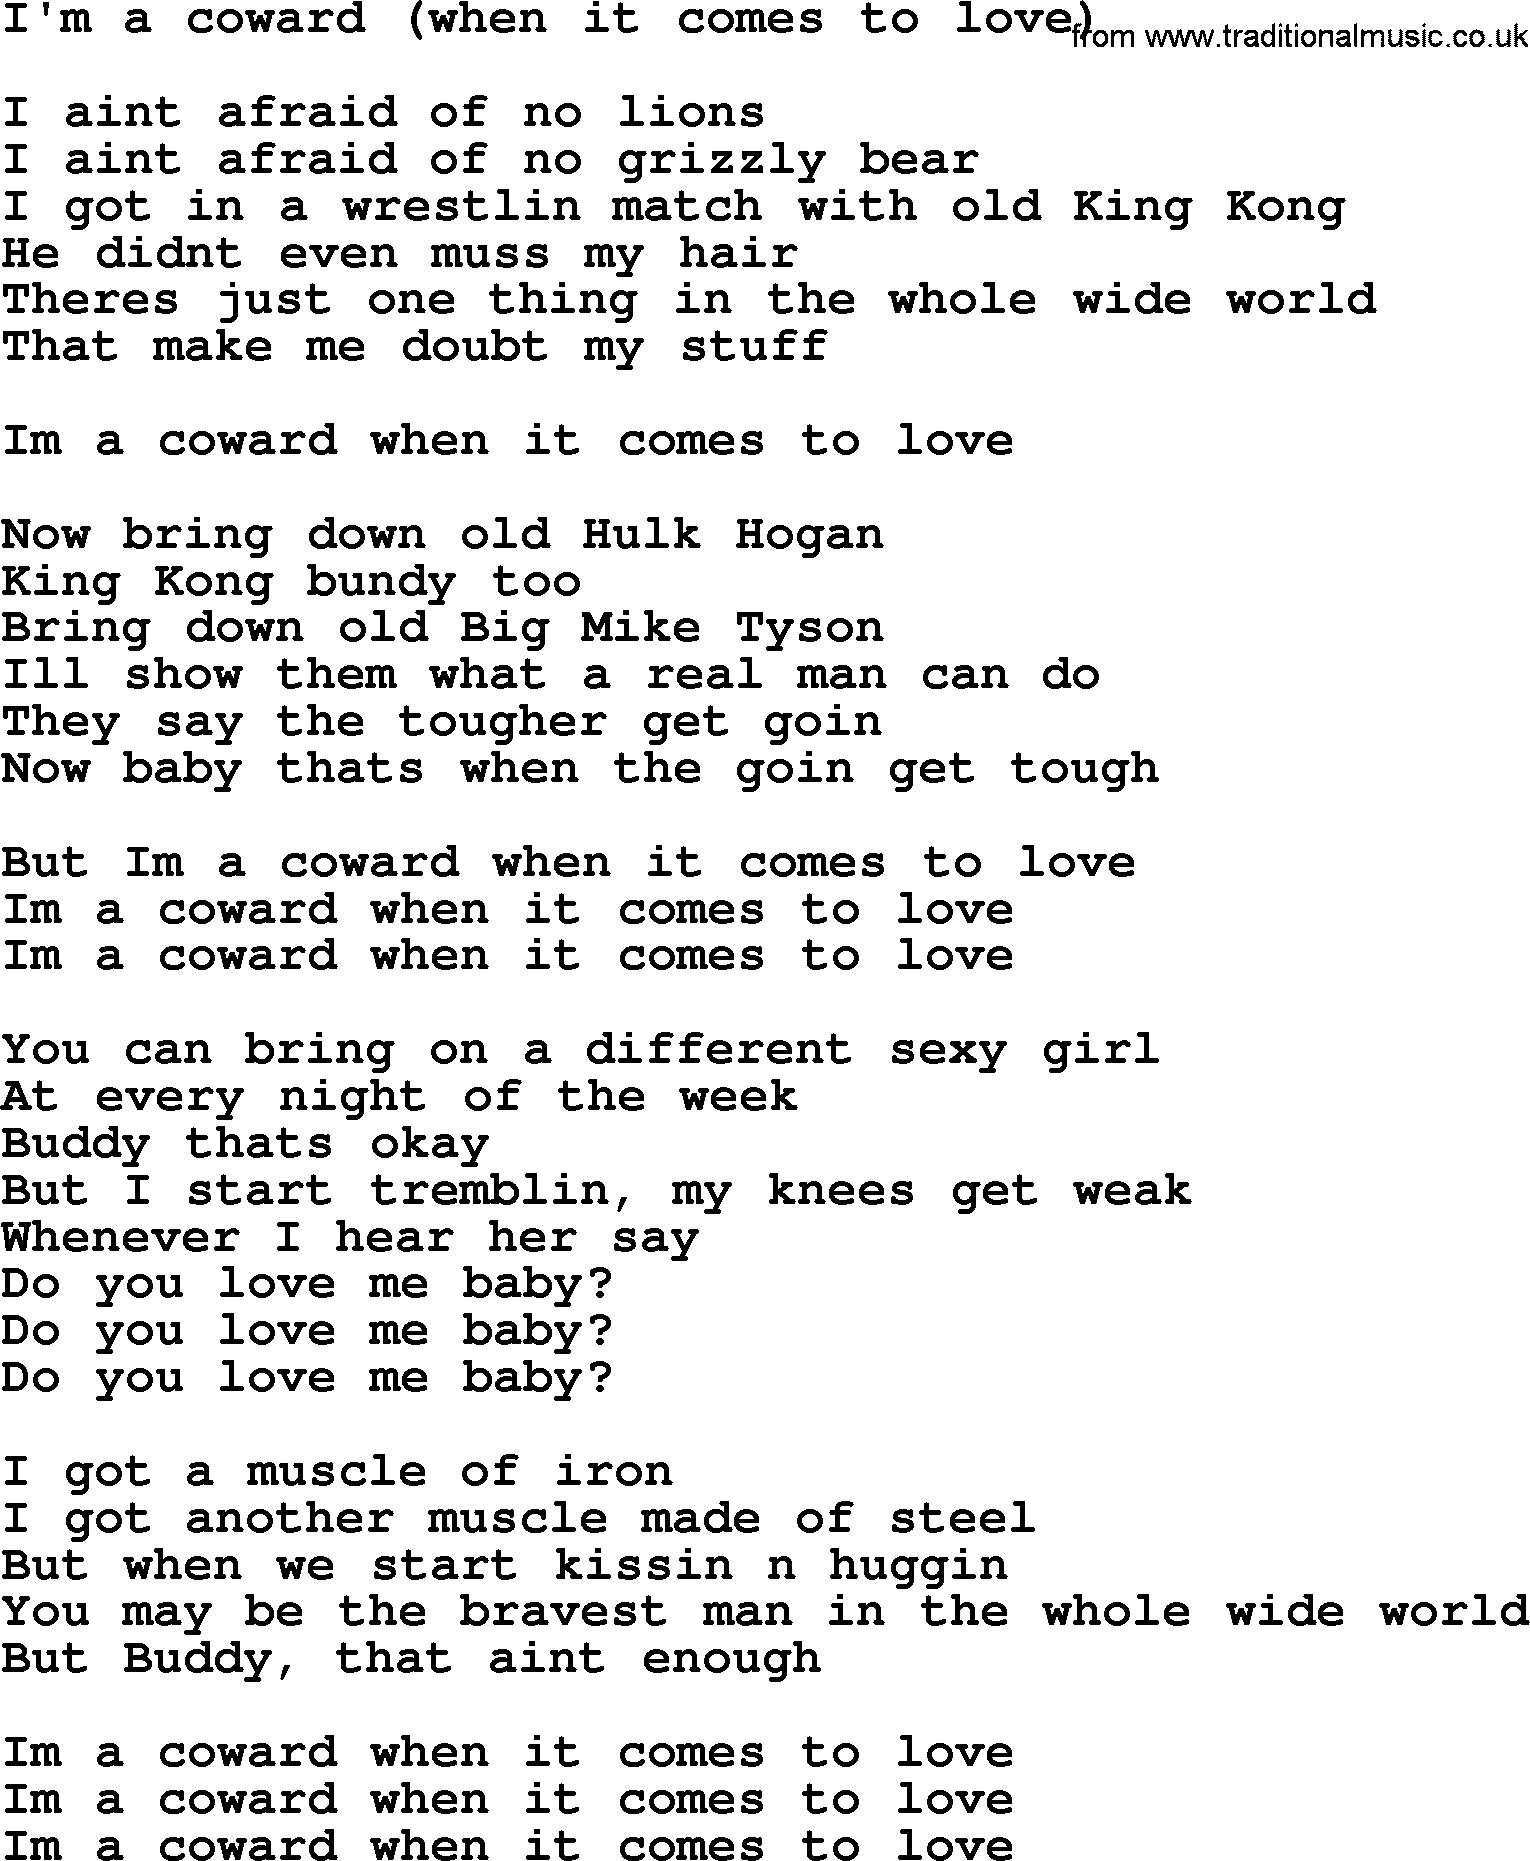 Bruce Springsteen song: I'm A Coward(When It Comes To Love) lyrics